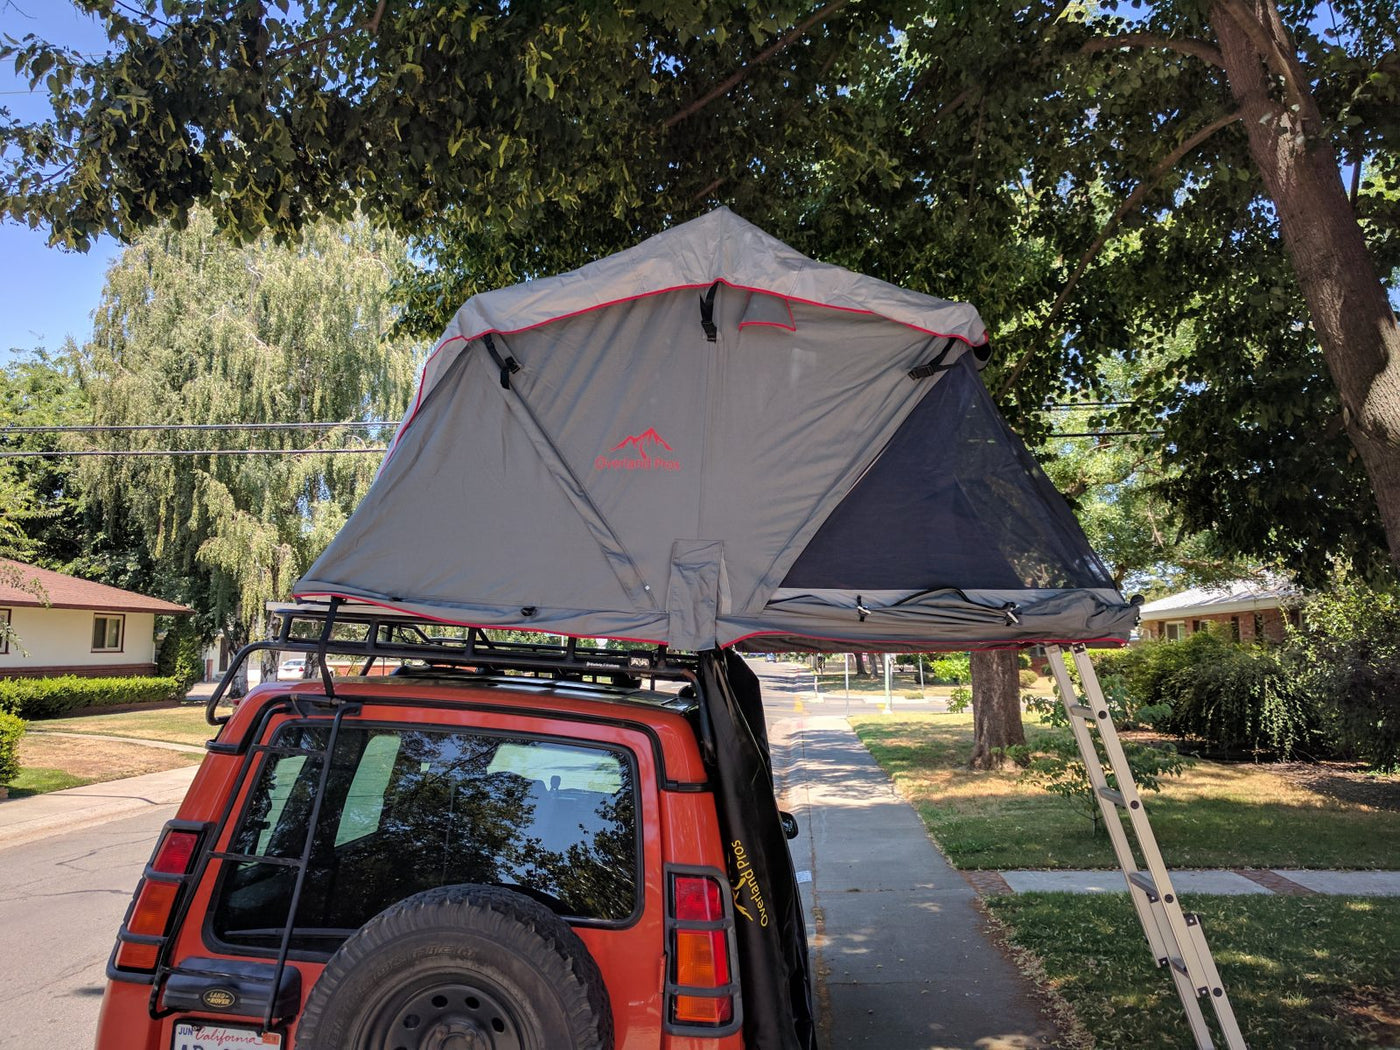 Overland Pro Anza 2000 (4-5 Person) Roof Top Tent - Next Jump Outfitters